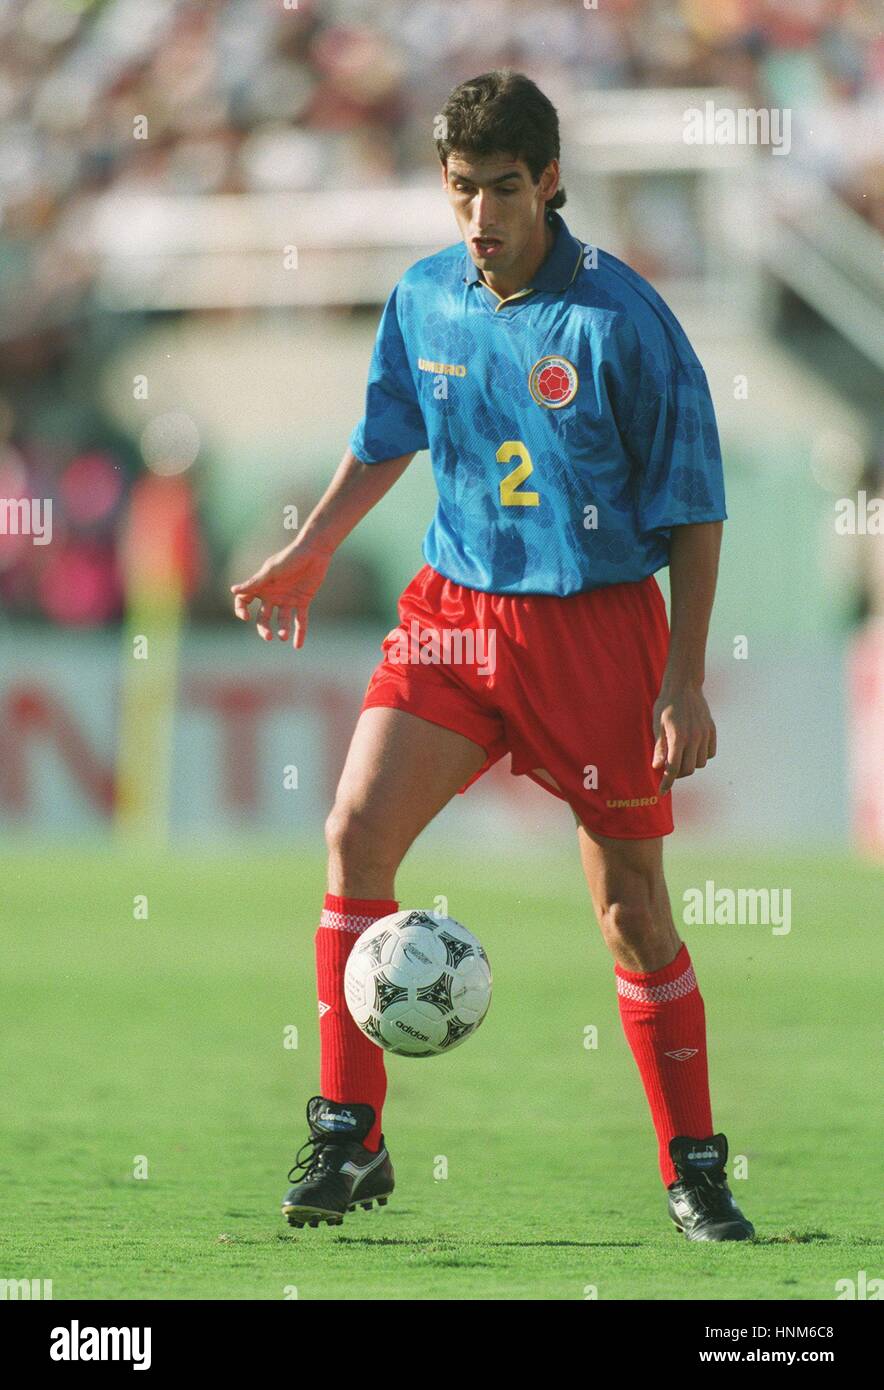 ANDRES ESCOBAR COLOMBIA 28 February 1996 Stock Photo - Alamy